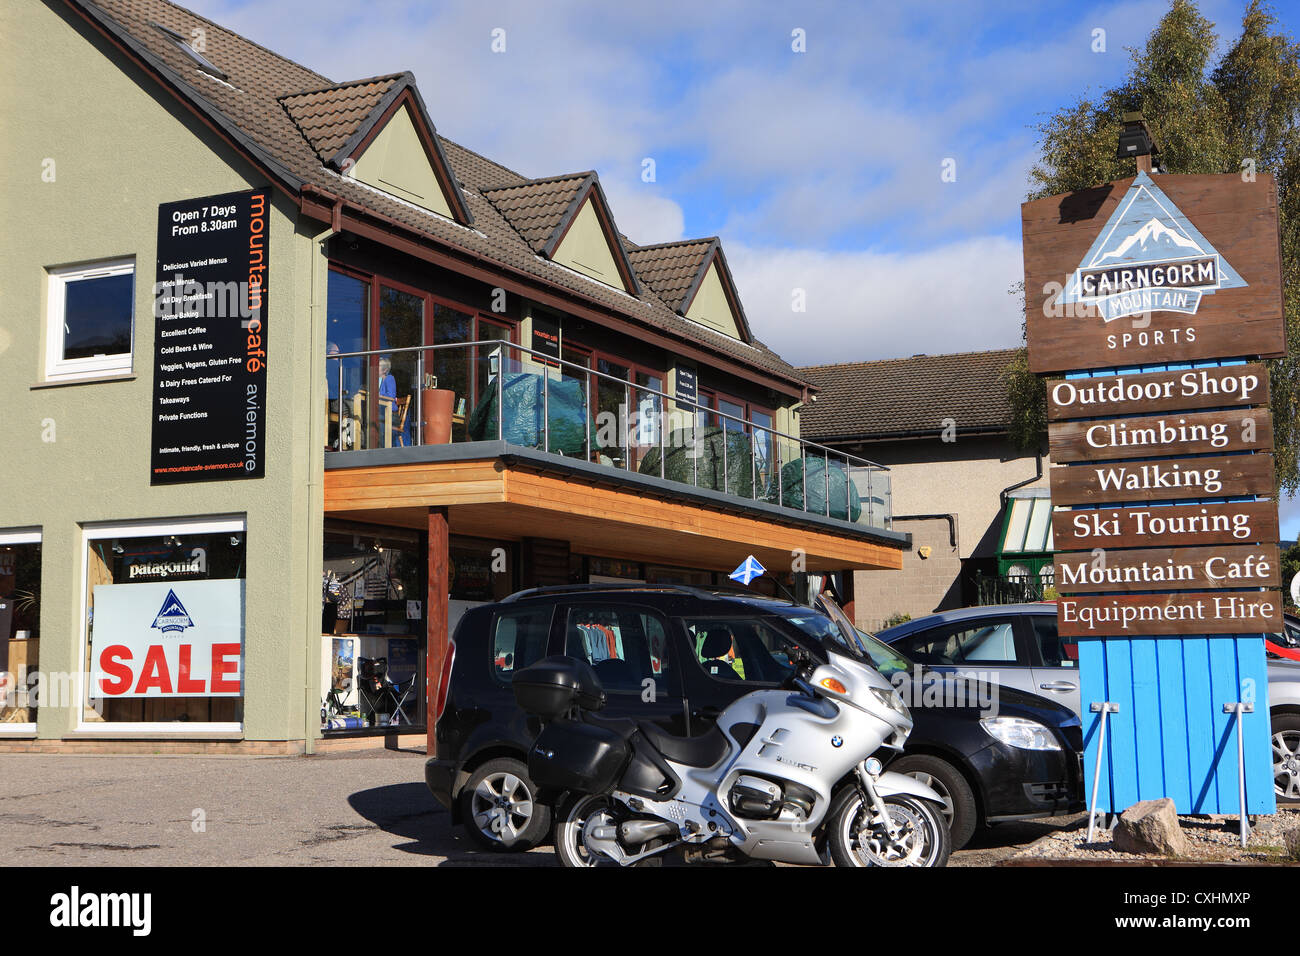 Mountain cafe and Cairngorm sports outdoor shop in Aviemore part of the Cairngorms National Park in the Scottish Highlands Stock Photo